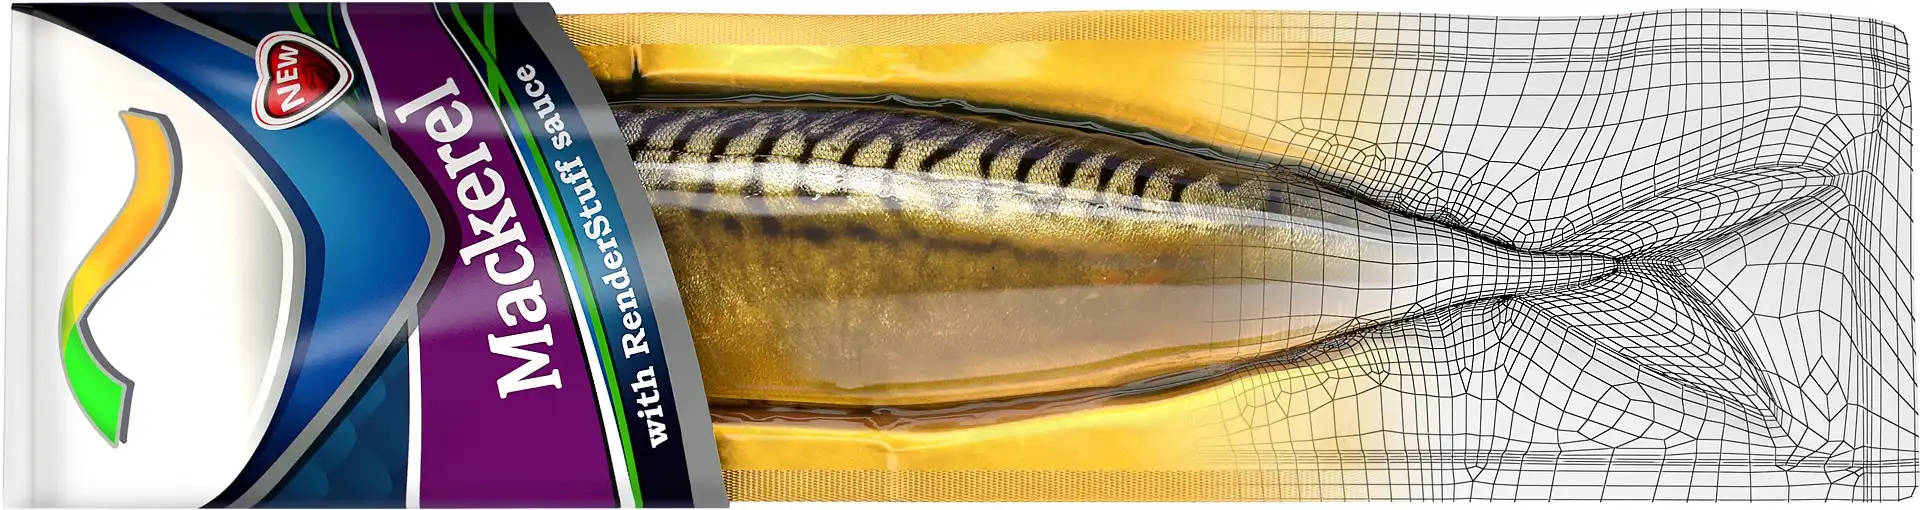 Photorealistic 3D-visualization of packaged mackerel 3D-model with smooth transition into a wireframe.